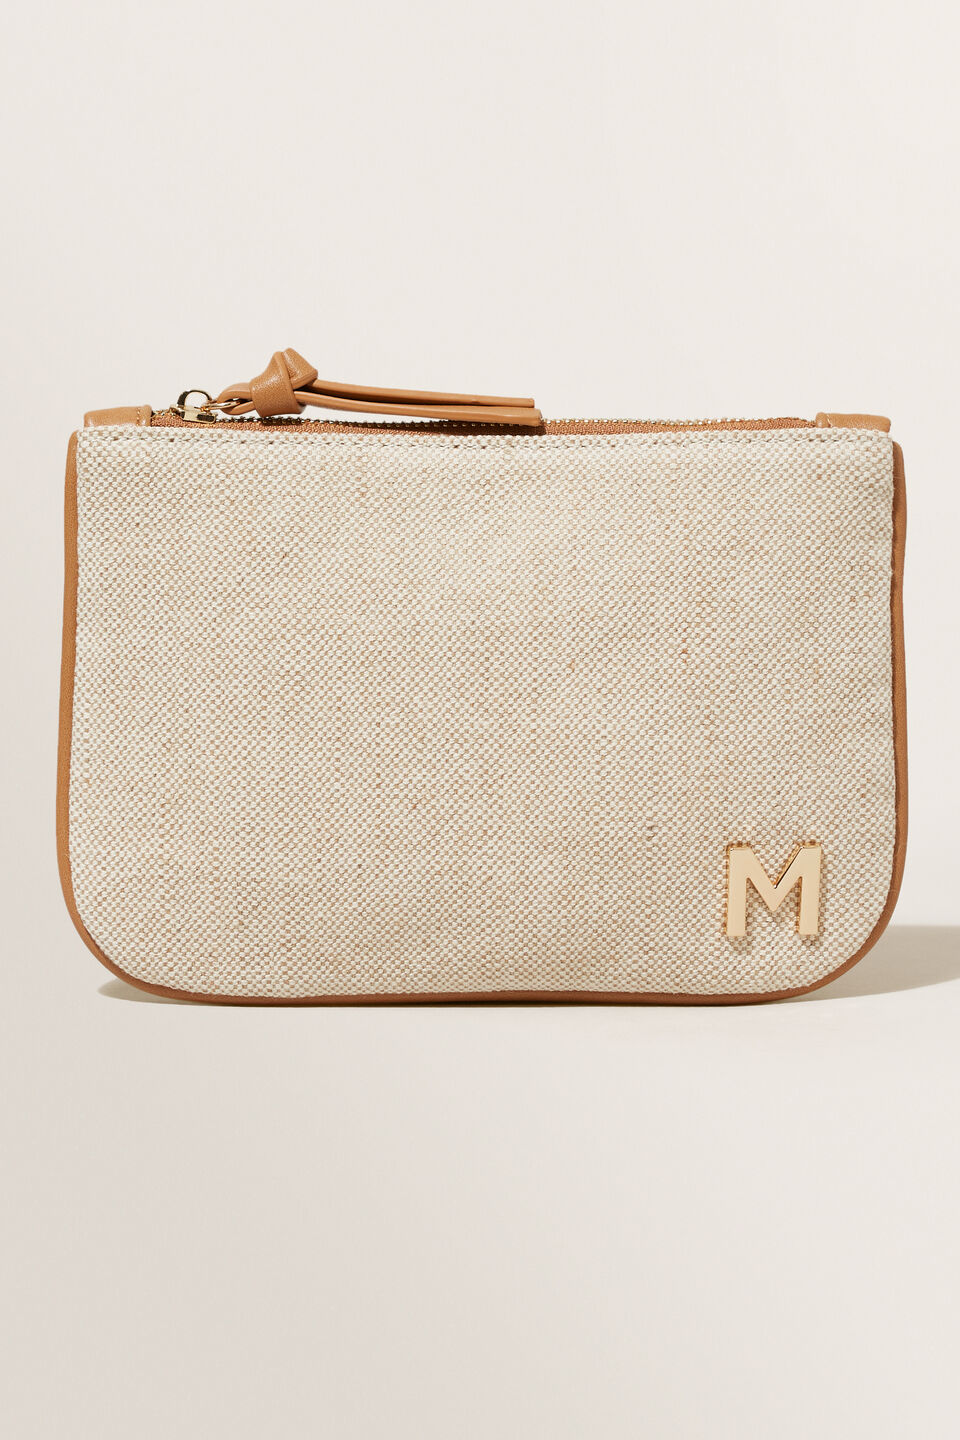 Initial Pouch  M